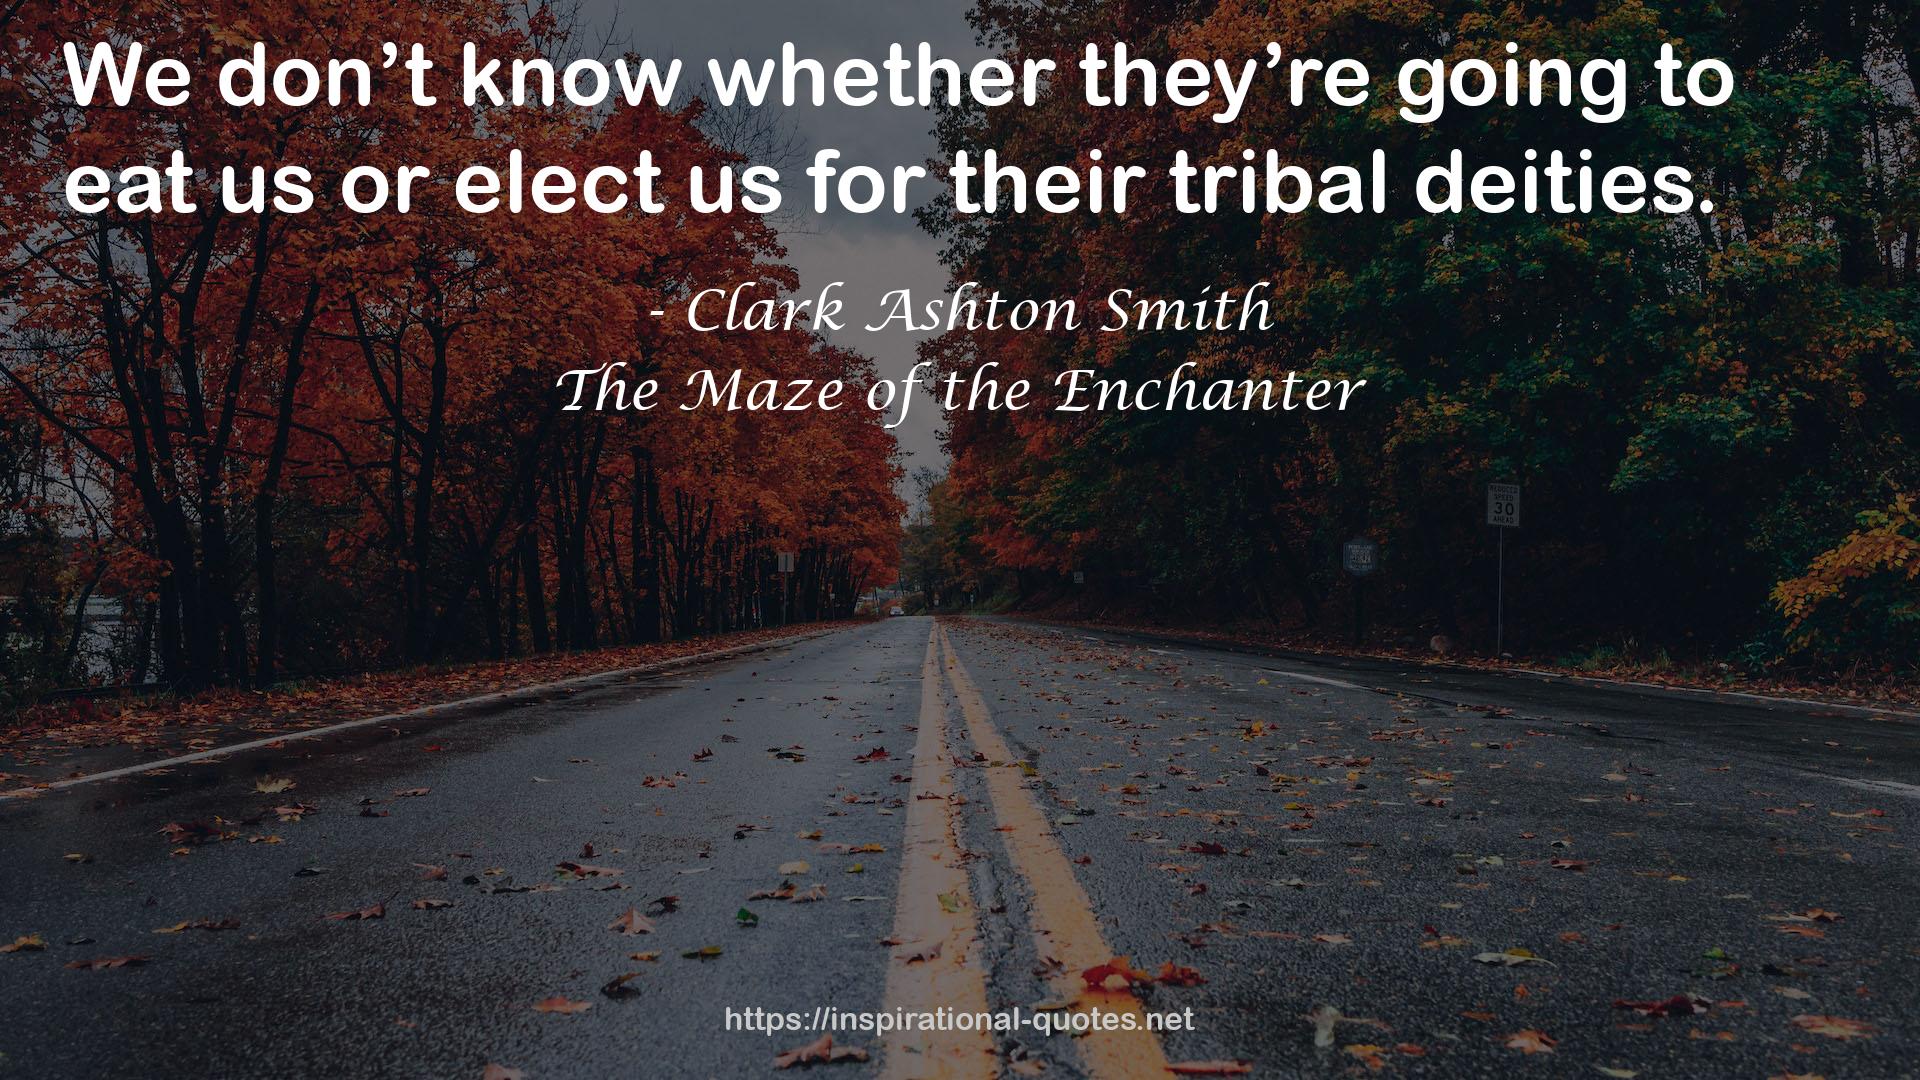 The Maze of the Enchanter QUOTES